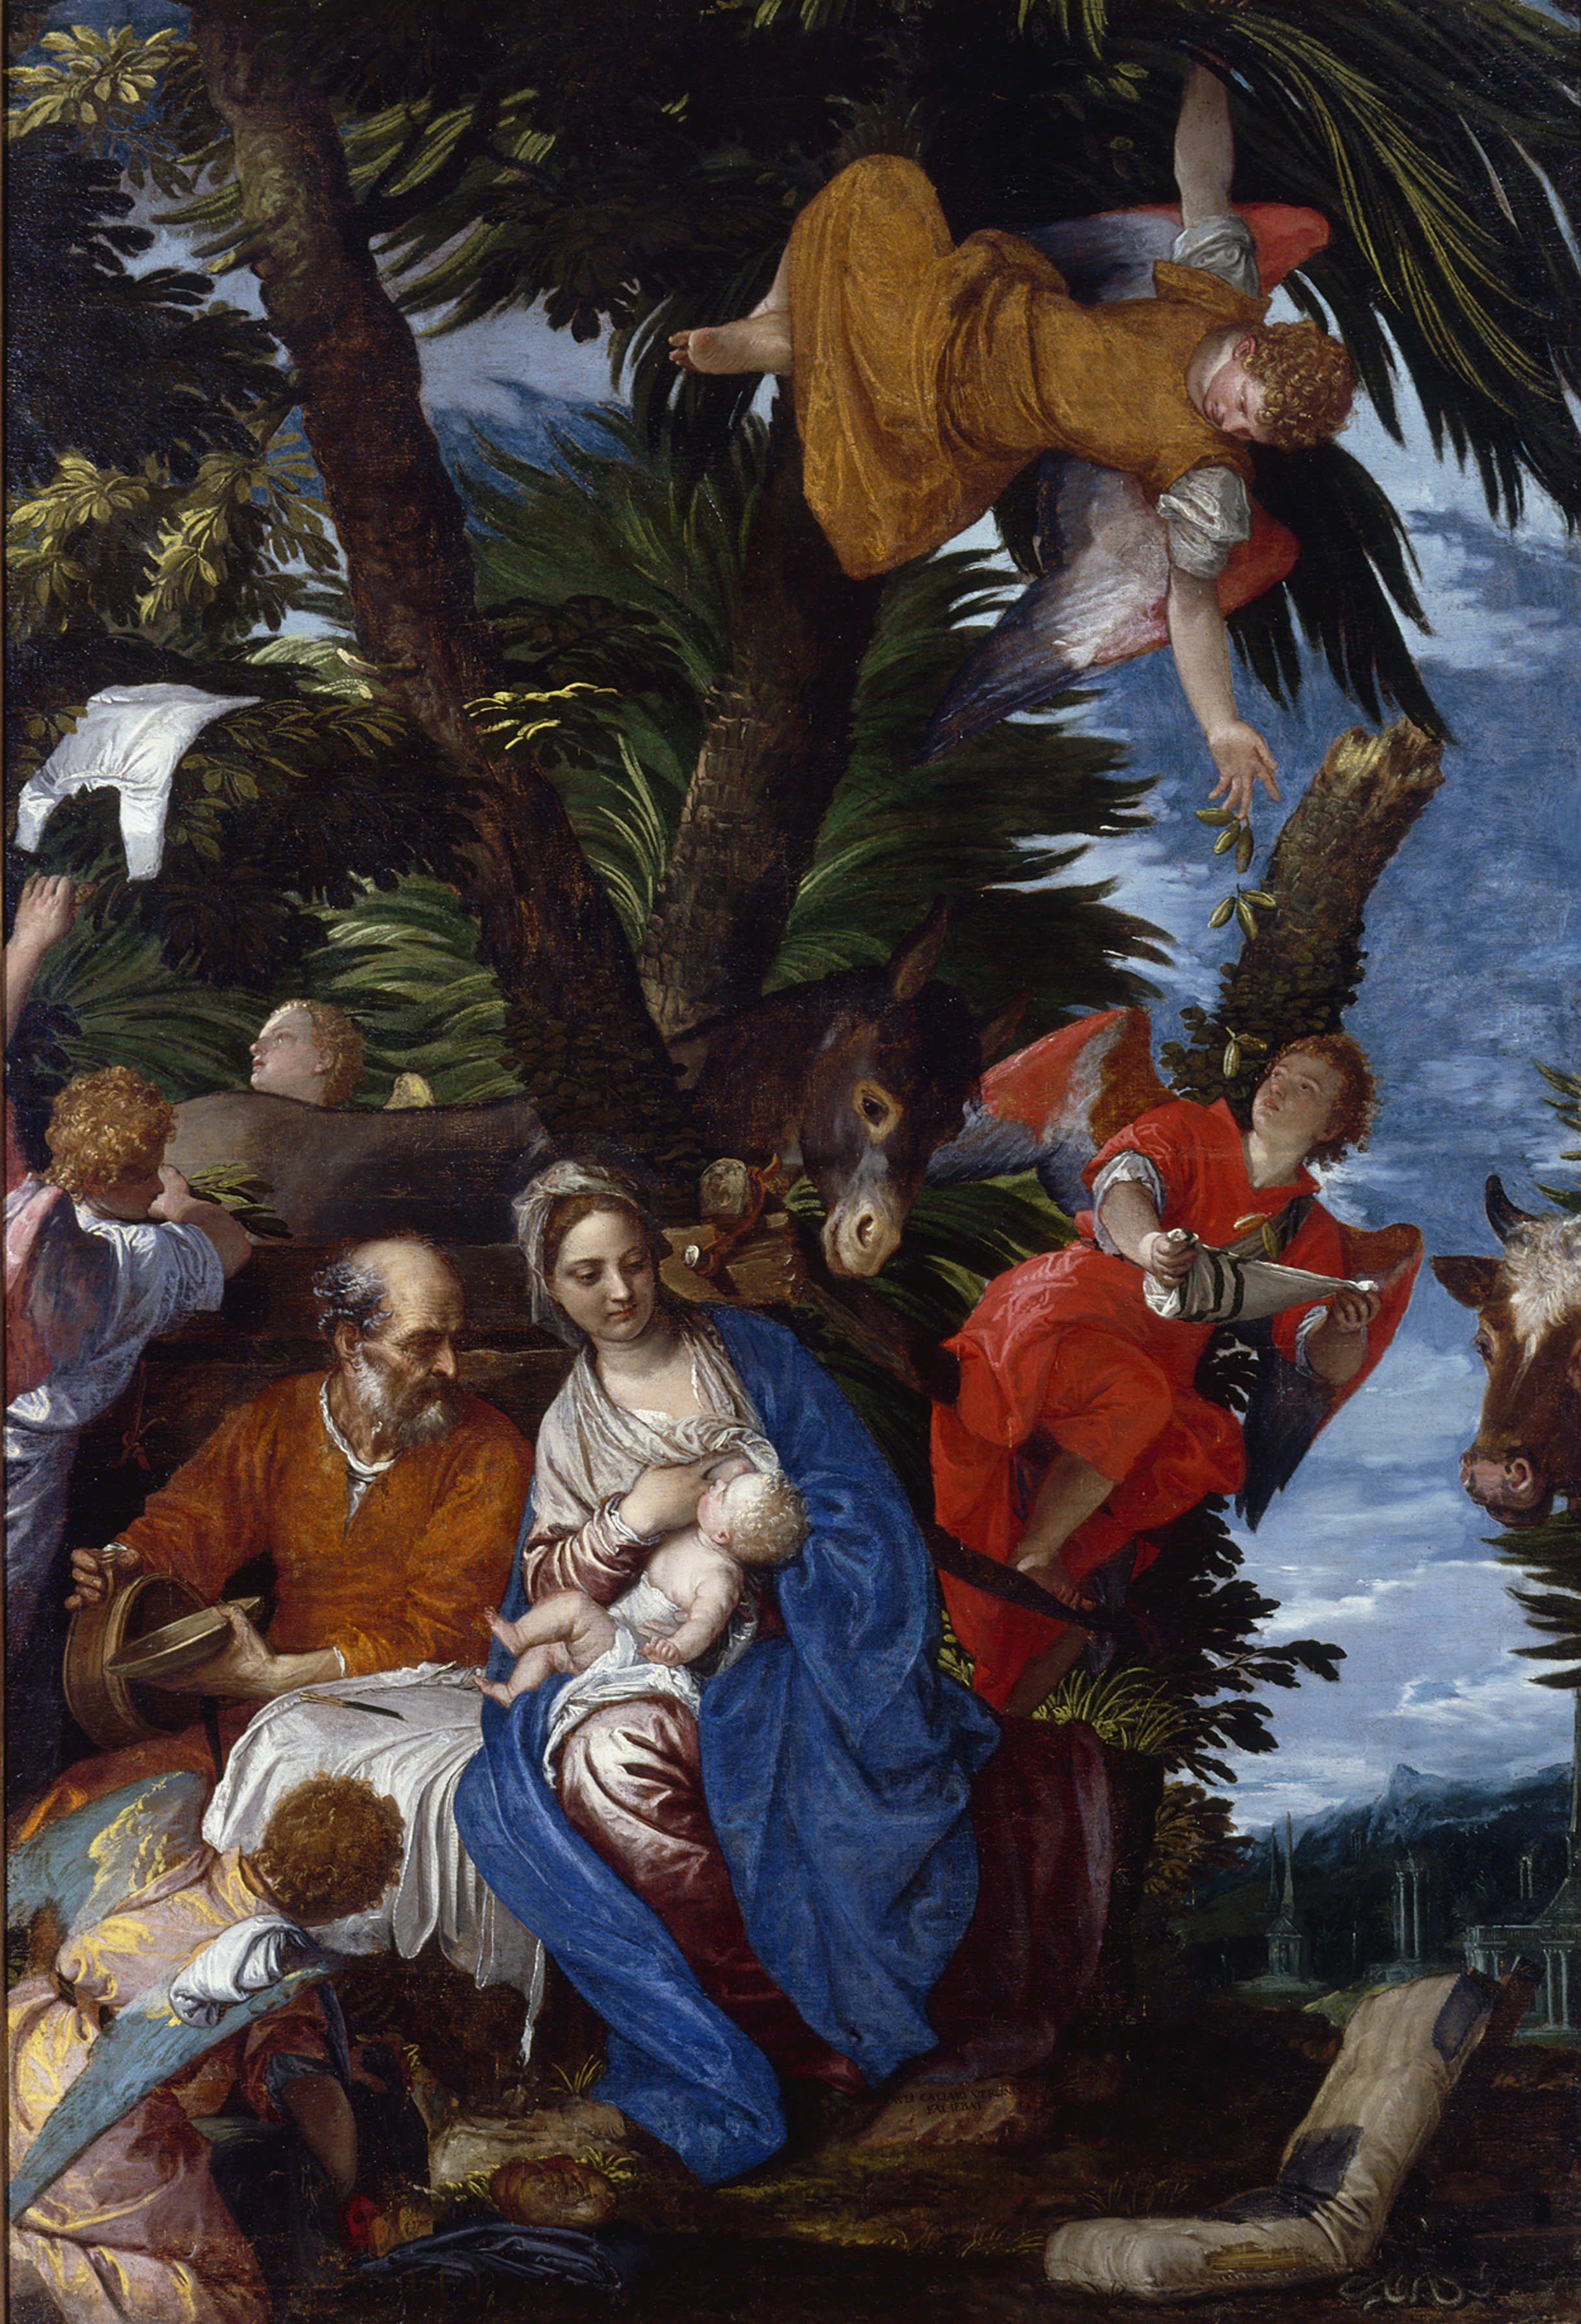 Paolo Veronese, Allegory of Painting